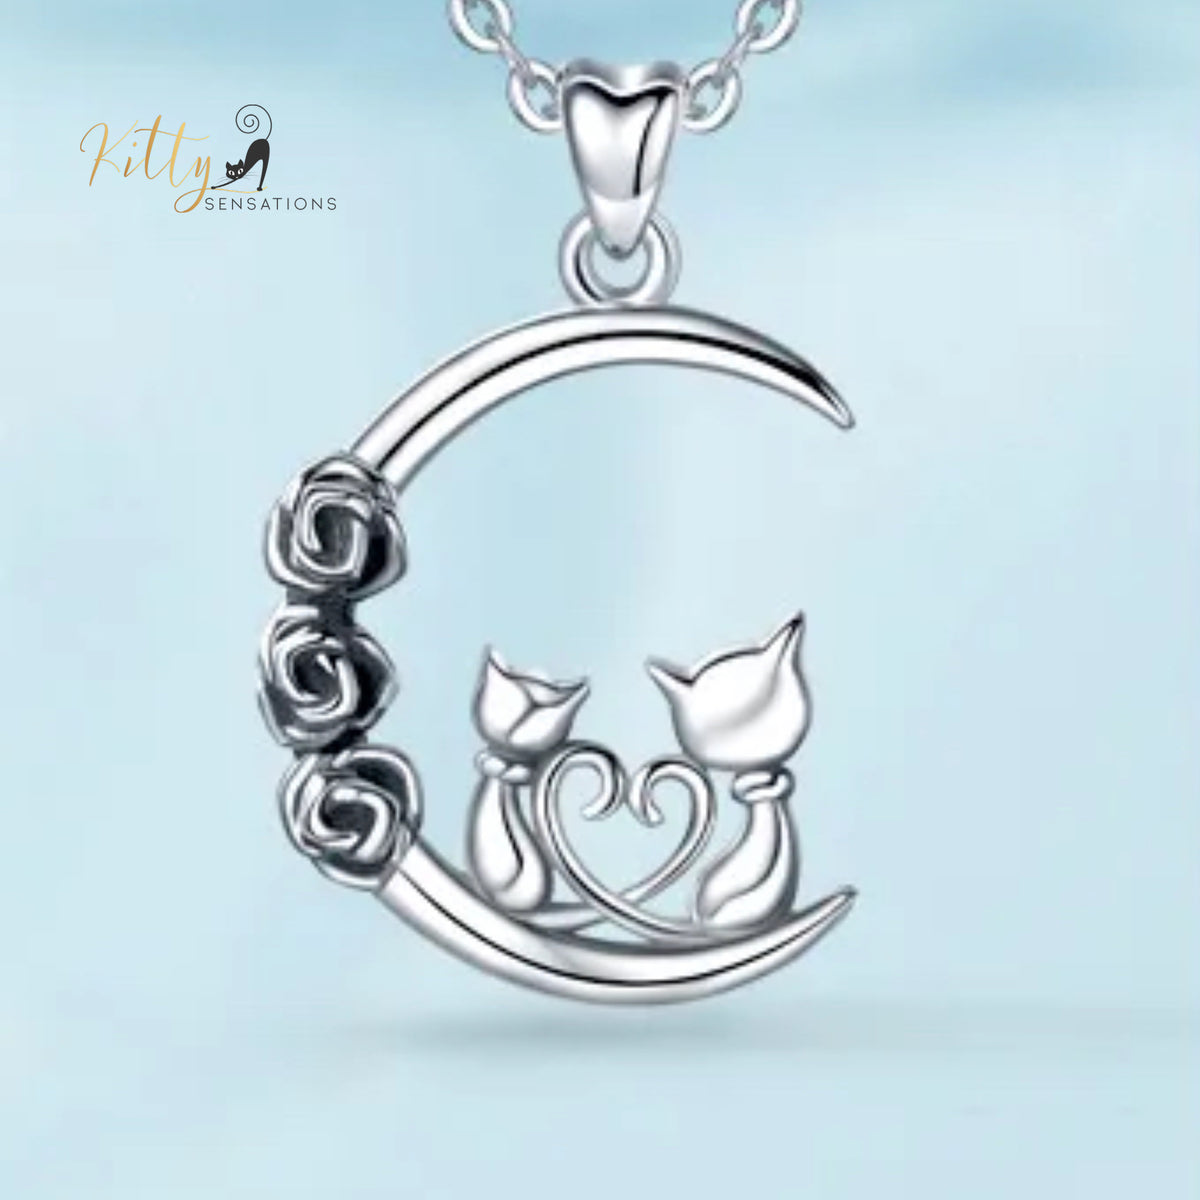 www.KittySensations.com: Roses and Moon Cat Couple Necklace in Solid 925 Sterling Silver ($42.50): https://www.kittysensations.com/products/roses-and-moon-cat-couple-necklace-in-solid-925-sterling-silver